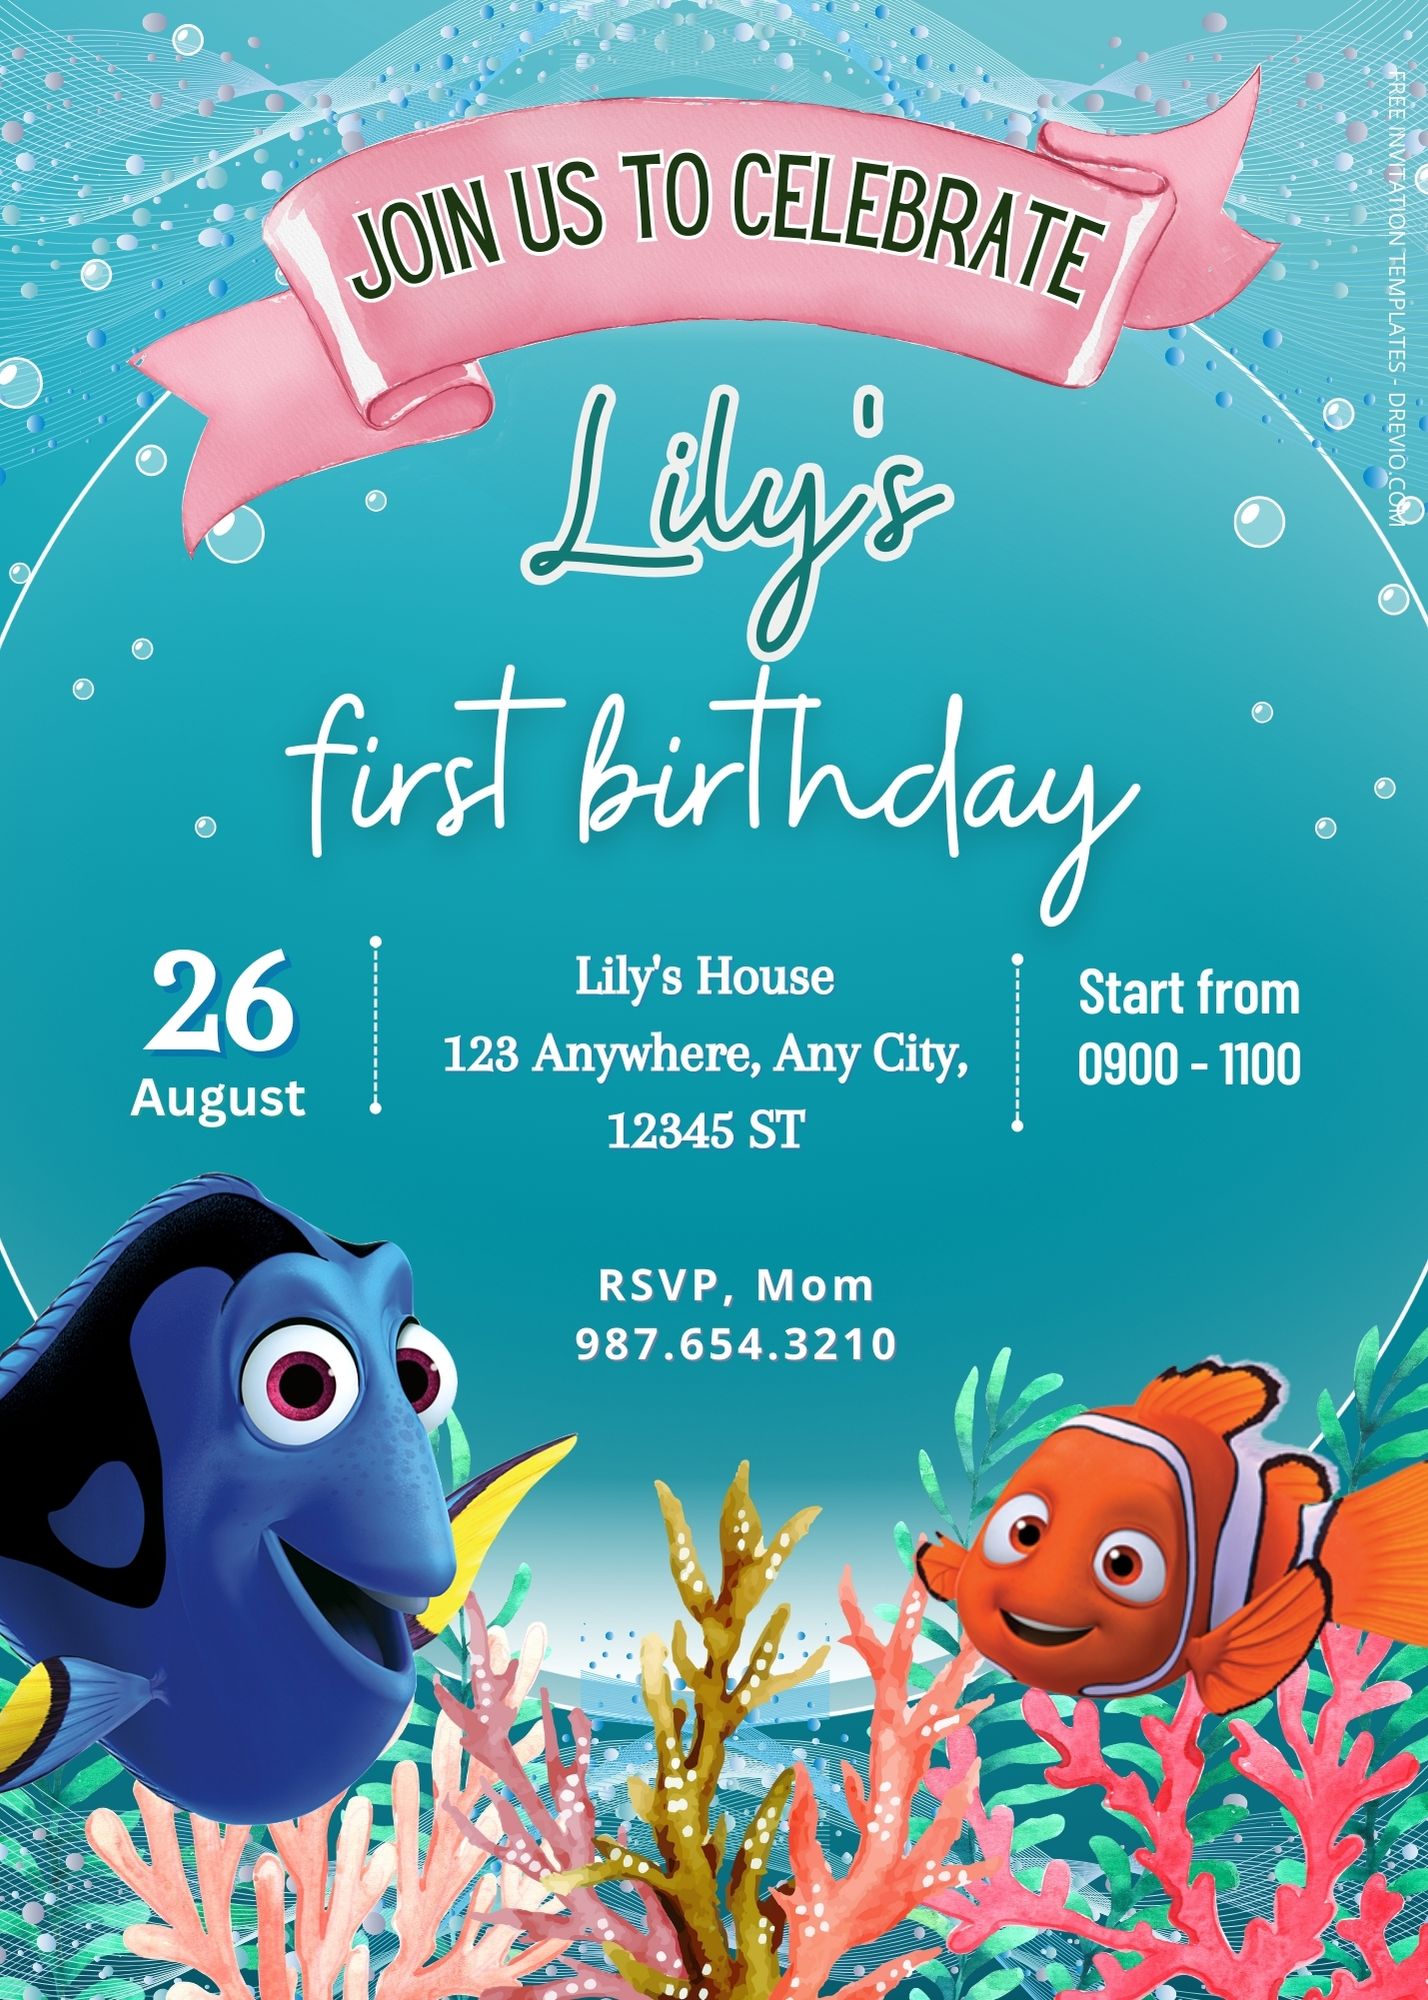 FREE Under The Sea Finding Nemo Birthday Invitation Templates  Download  Hundreds FREE PRINTABLE Birthday Invitation Templates